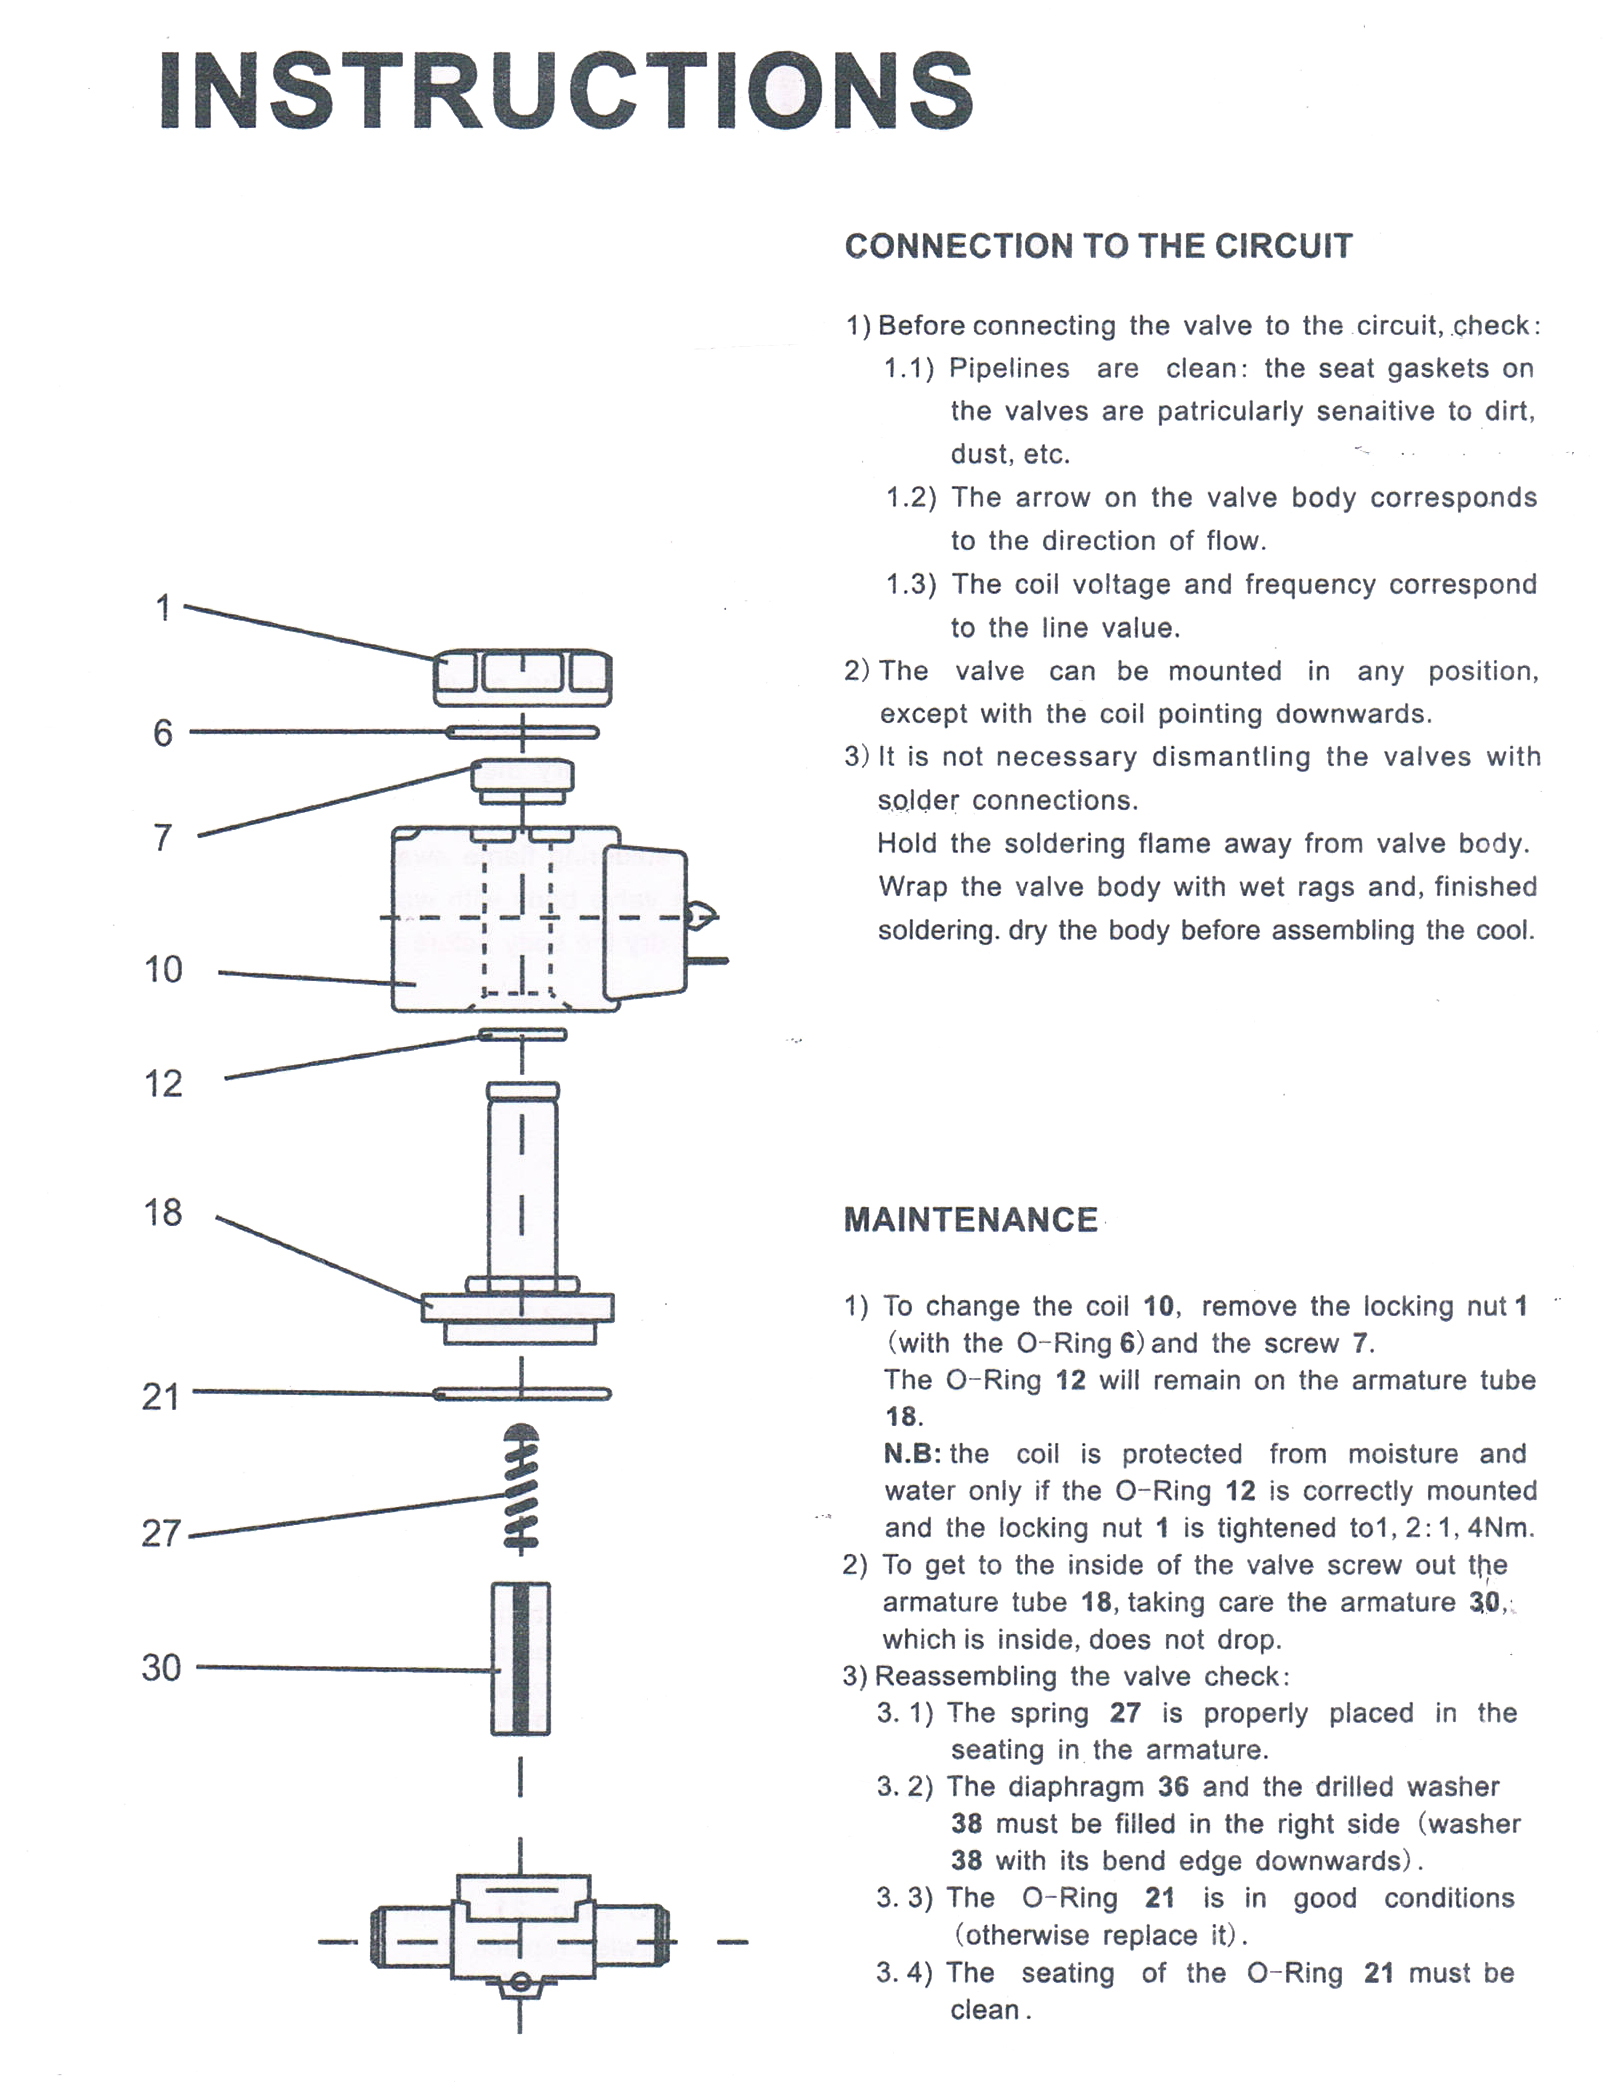 Instructions of MSV-1090/6 SAE Connection Refrigeration Solenoid Valve to control R12,R22;R134a,R410,R404